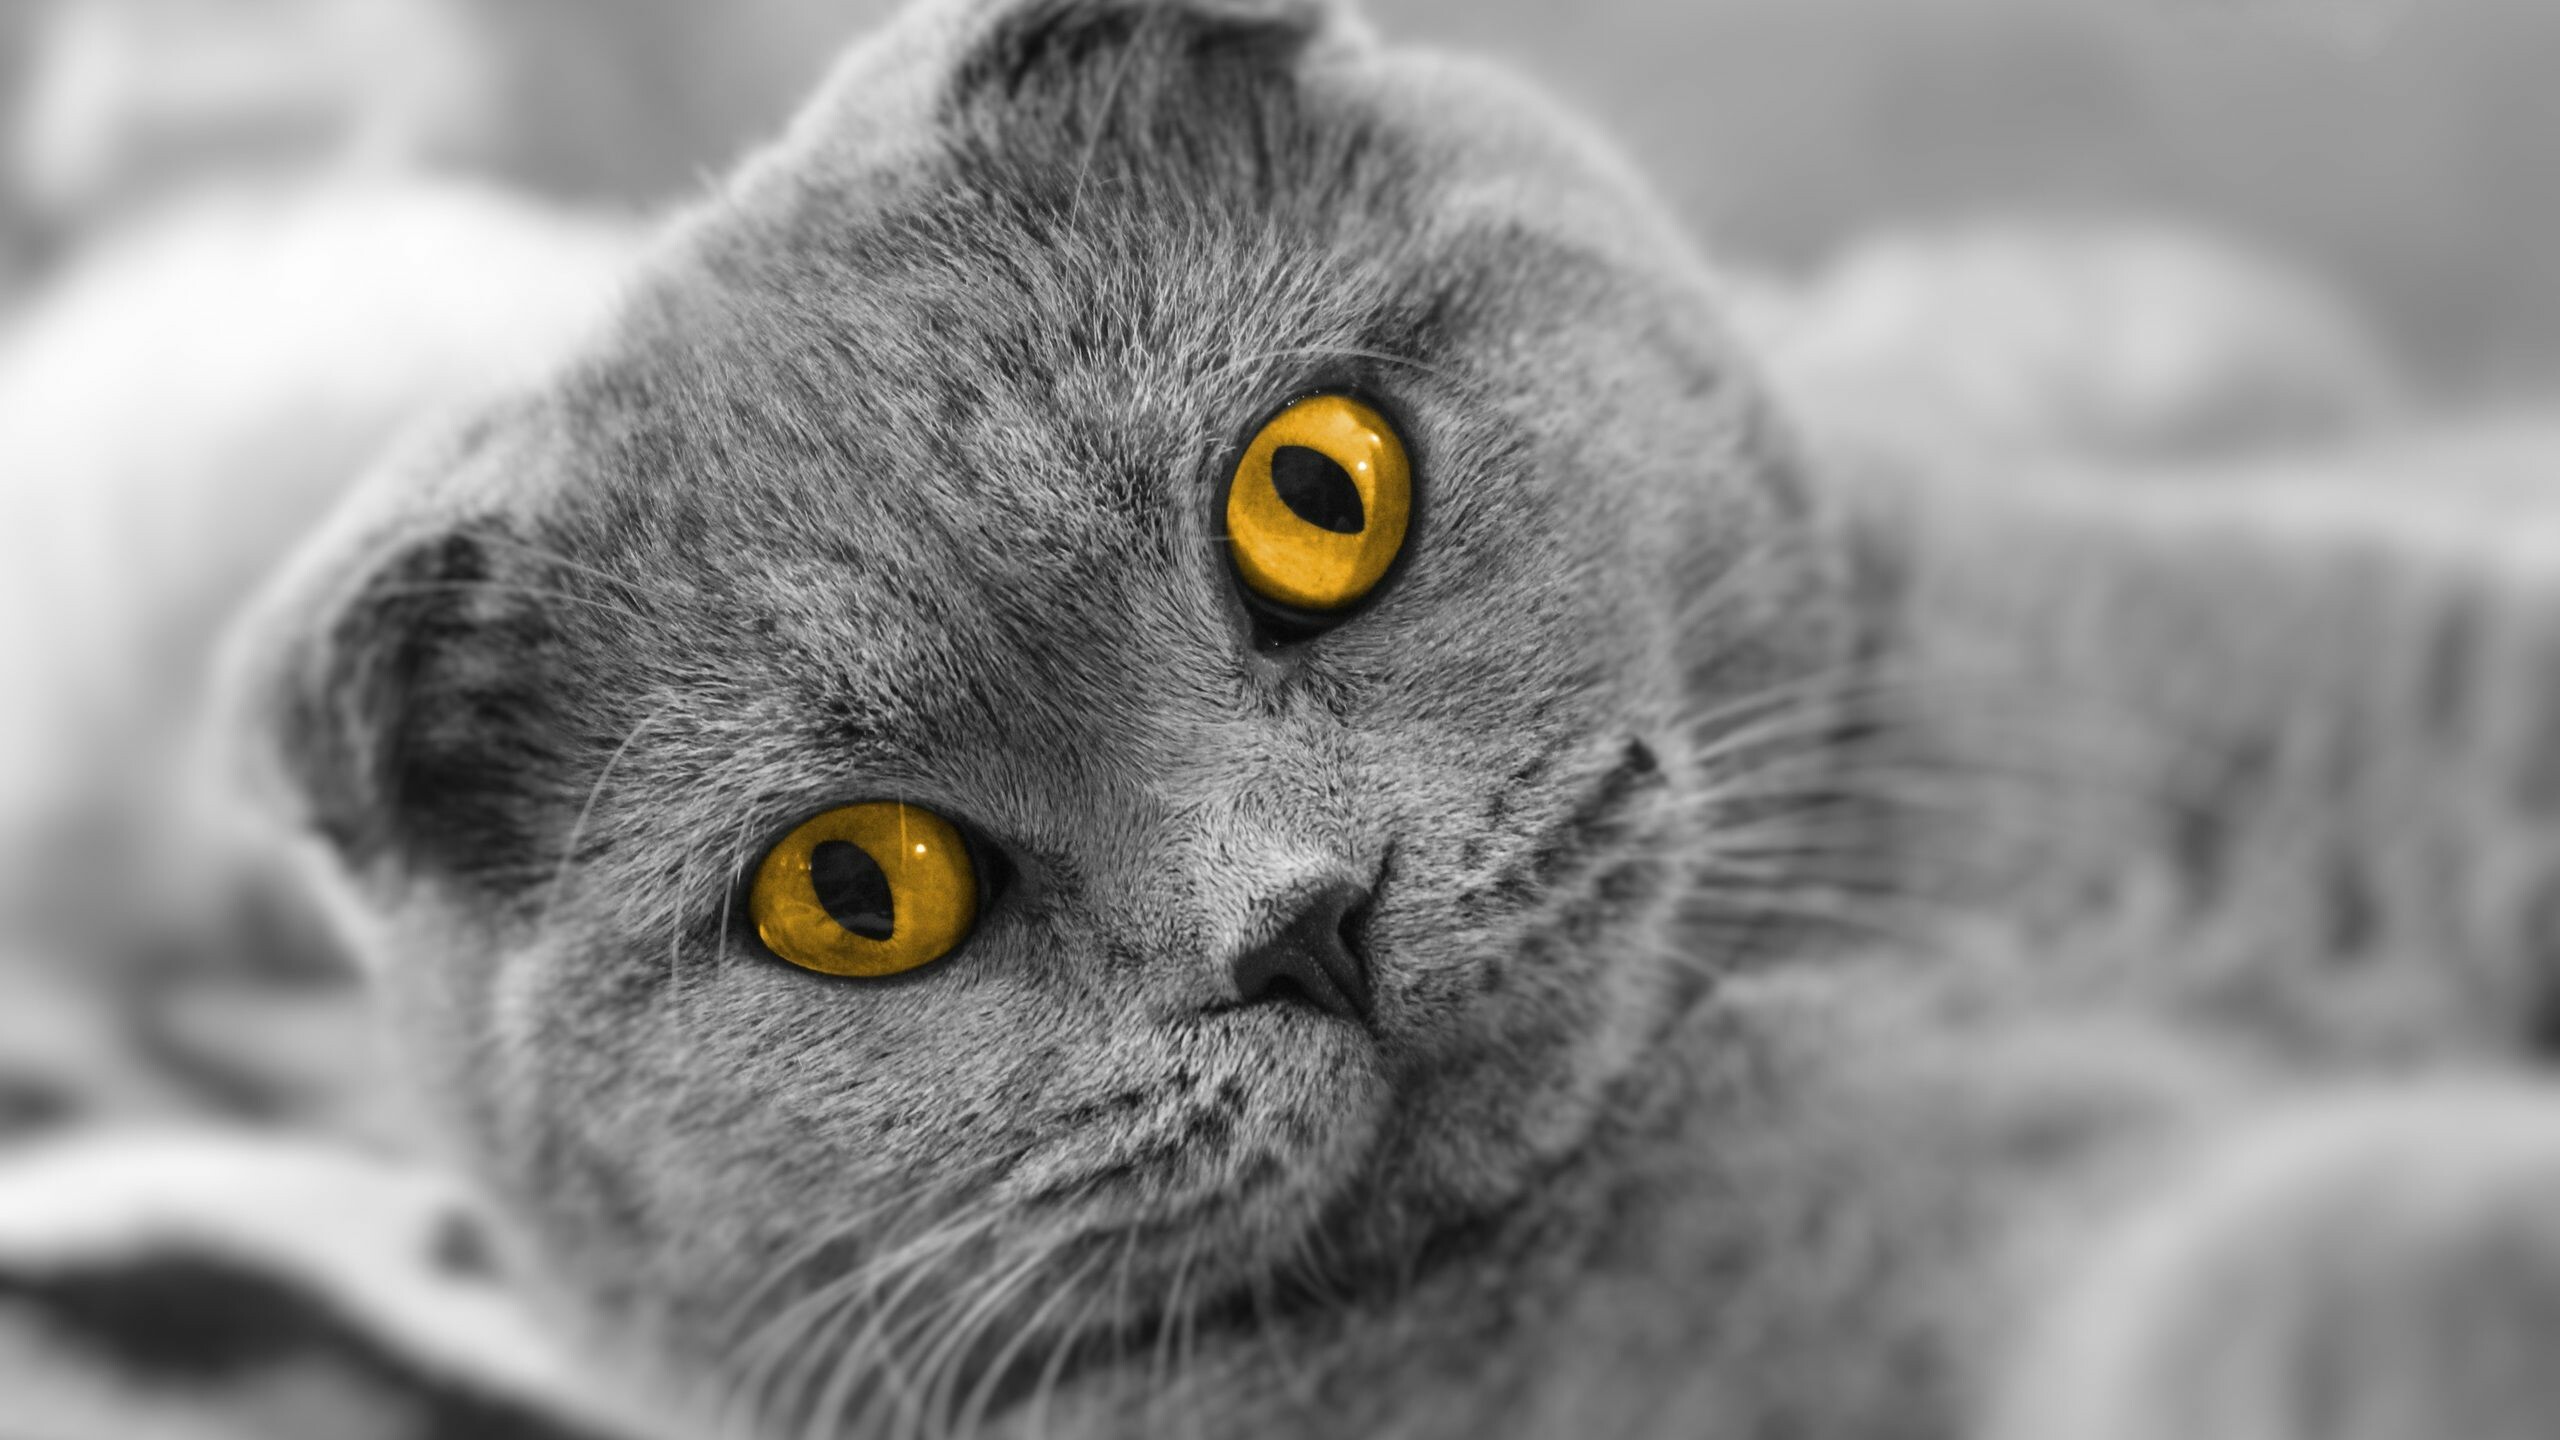 Scottish Fold: An intelligent, sweet-tempered, soft-spoken, and easily adaptable to new people and situations cat breed. 2560x1440 HD Wallpaper.